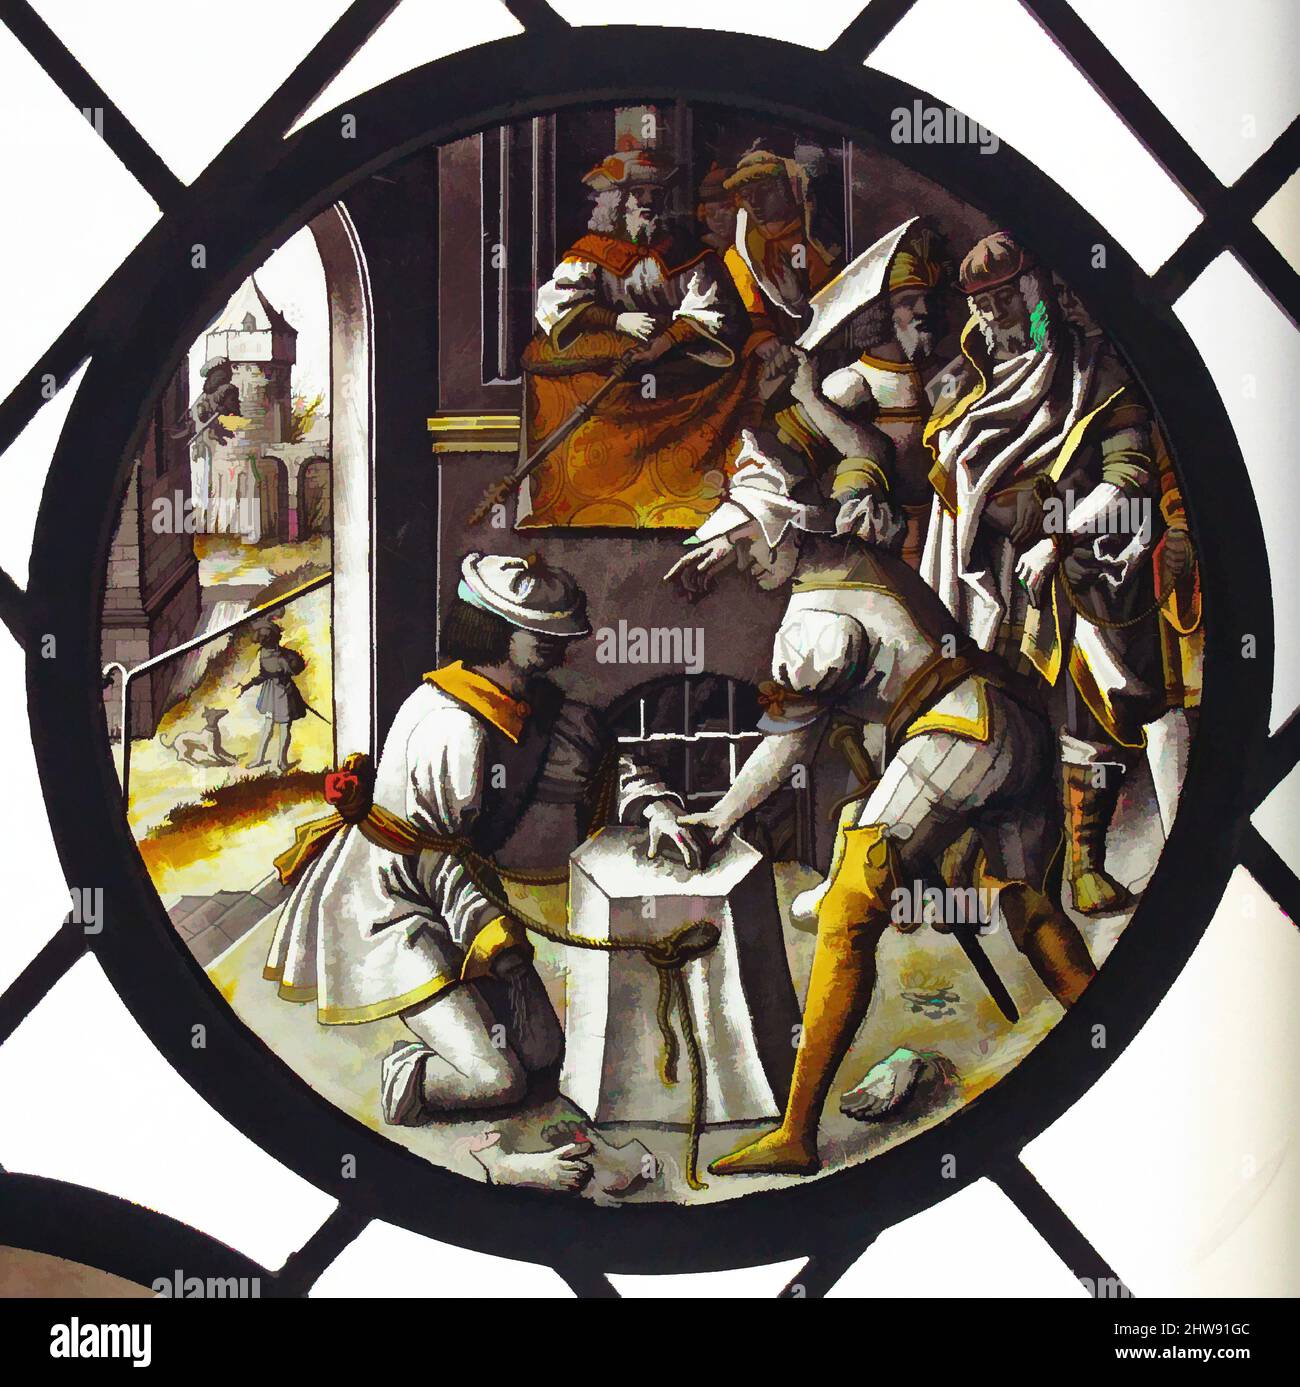 Art inspired by Roundel with Martyrdom of Saint Jacobus Intercisus, ca. 1520, Made in Leiden, Netherlands, North Netherlandish or South Netherlandish, Colorless glass, vitreous paint and silver stain, Overall: 7 15/16 in. (20.2 cm), Glass-Stained, Classic works modernized by Artotop with a splash of modernity. Shapes, color and value, eye-catching visual impact on art. Emotions through freedom of artworks in a contemporary way. A timeless message pursuing a wildly creative new direction. Artists turning to the digital medium and creating the Artotop NFT Stock Photo